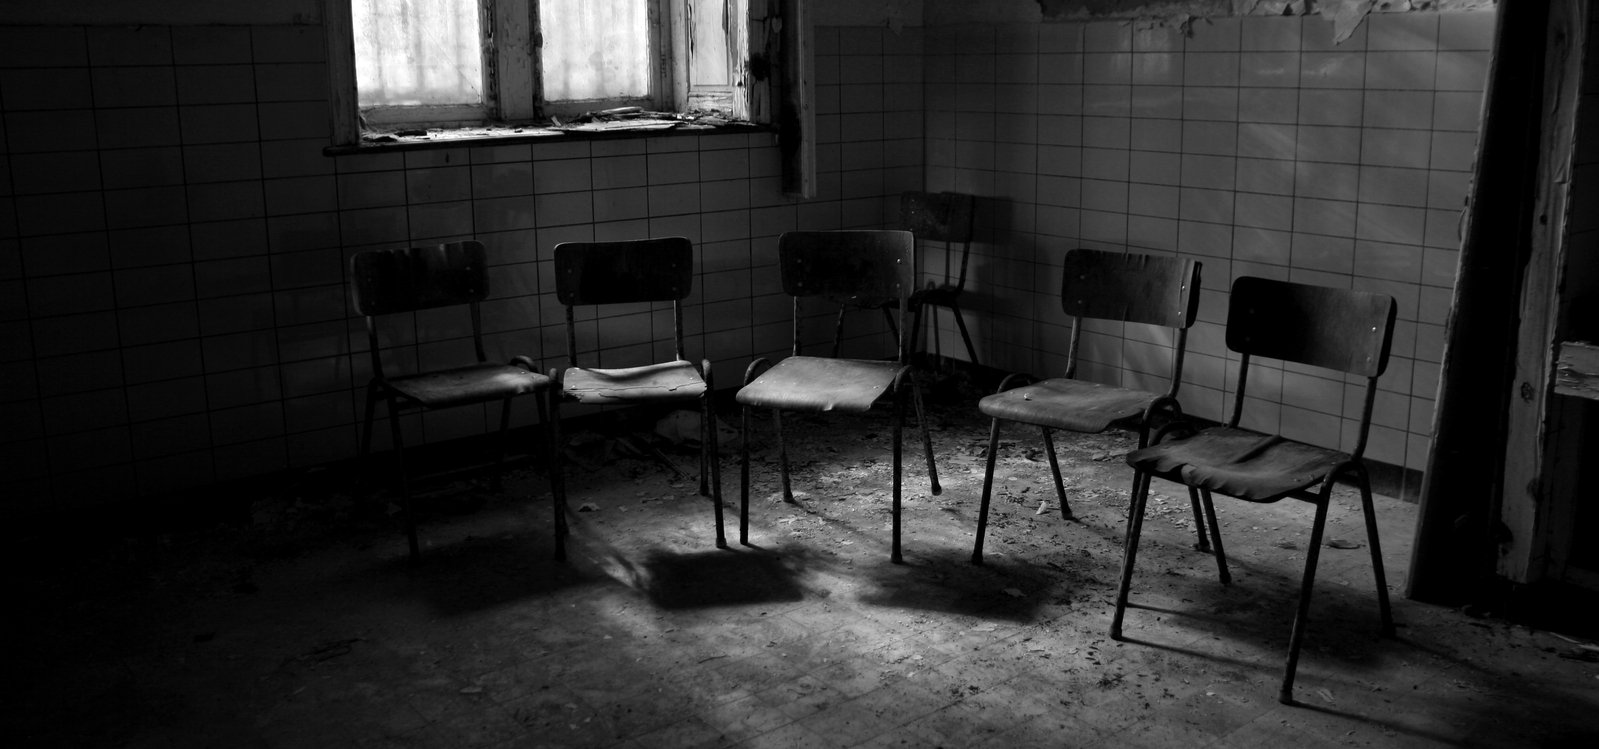 empty chairs in the middle of a room with tile walls